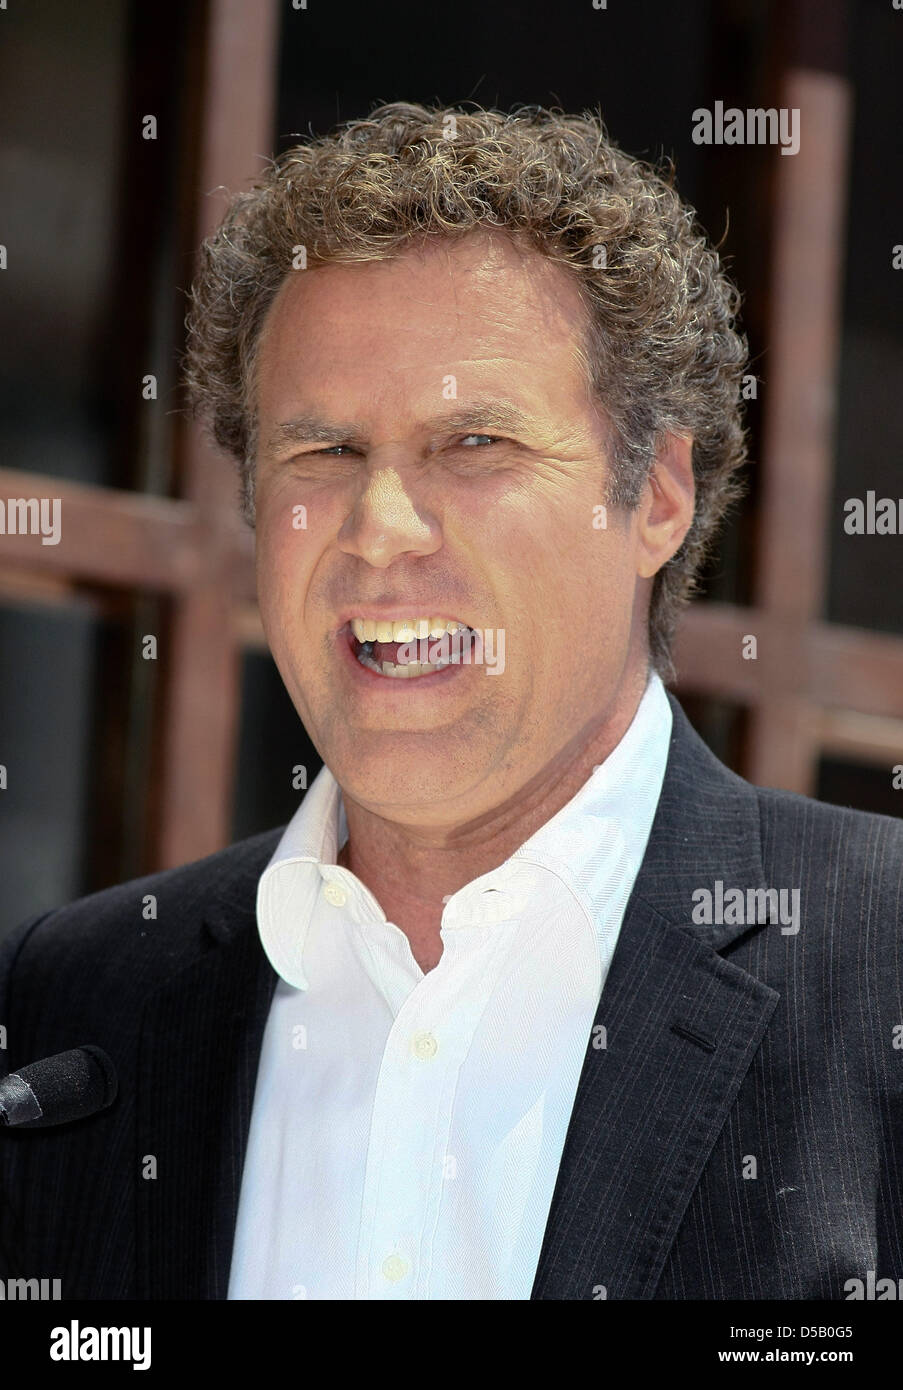 US actor Will Ferrell attends the ceremony for Mark Wahlberg's new star on the Hollywood Walk of Fame in Los Angeles, USA, July 29, 2010. Photo: Hubert Boesl Stock Photo